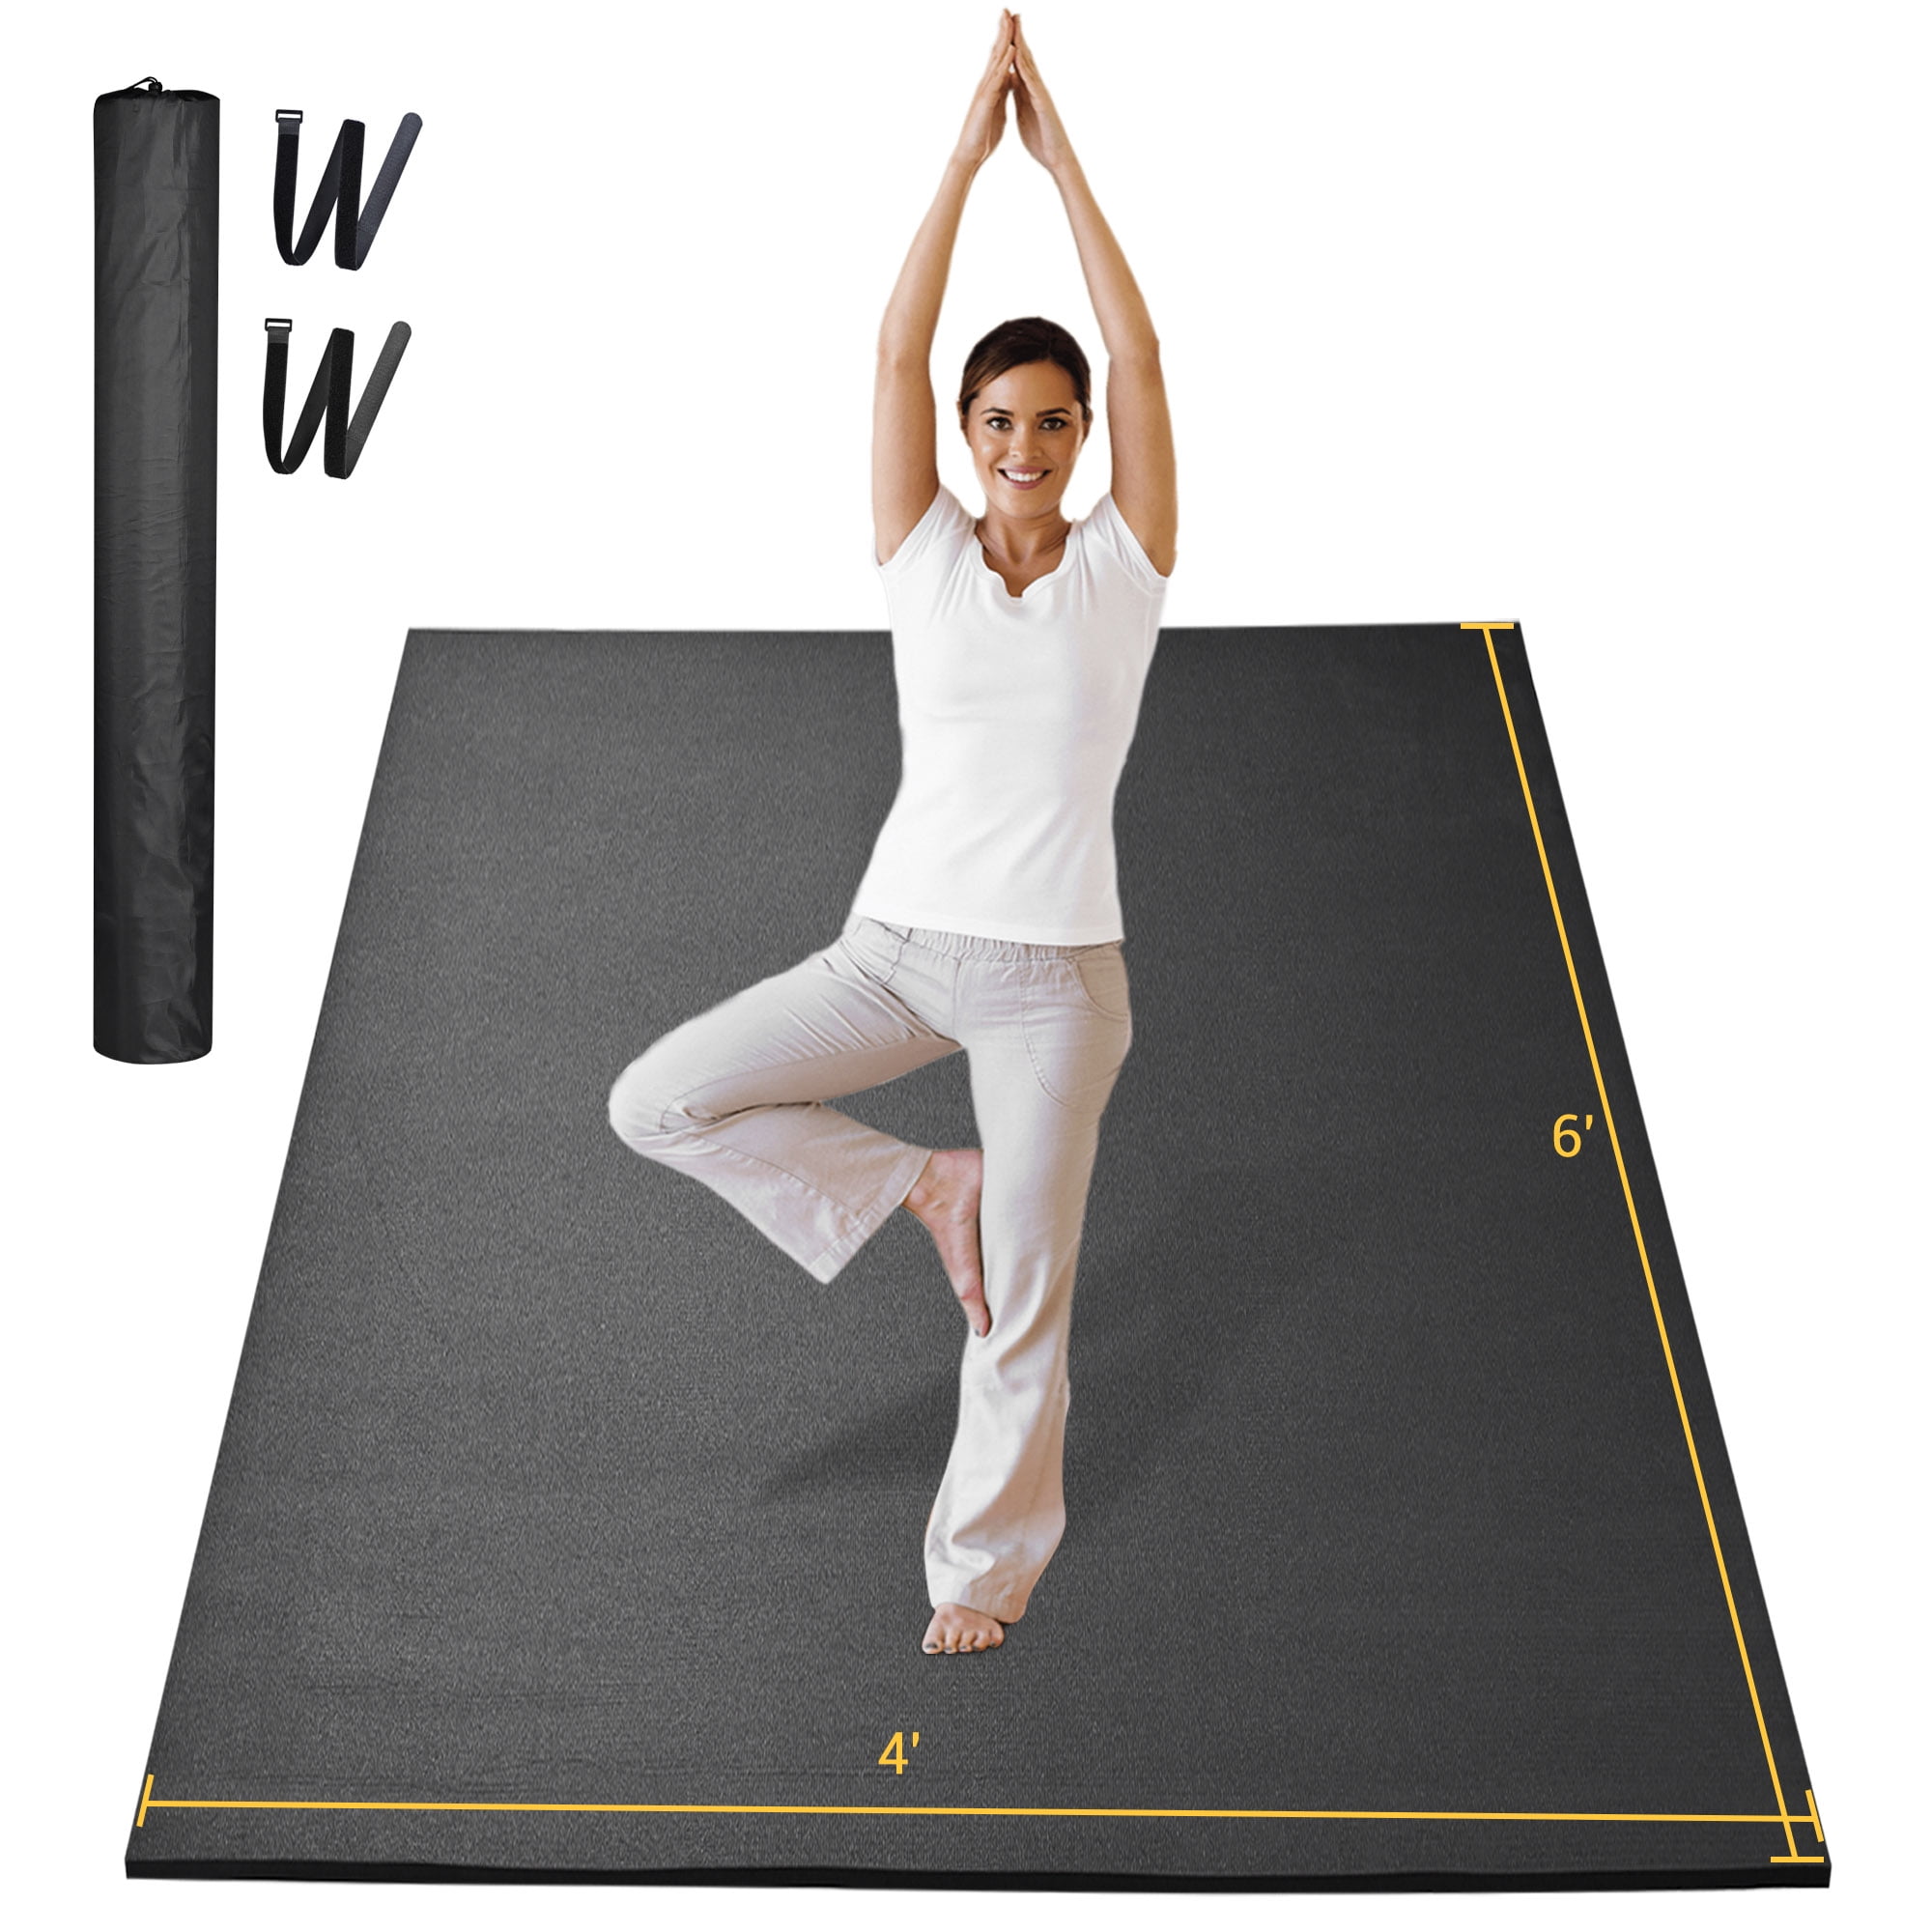  Large Yoga Mat for Men and Women - 6'x4'x6mm, Extra Wide TPE  Fitness Mat for Home Gym Workout, Non-Slip, Perfect for Barefoot Exercise ( Yoga, Pilates, Stretching, Meditation) : Sports 